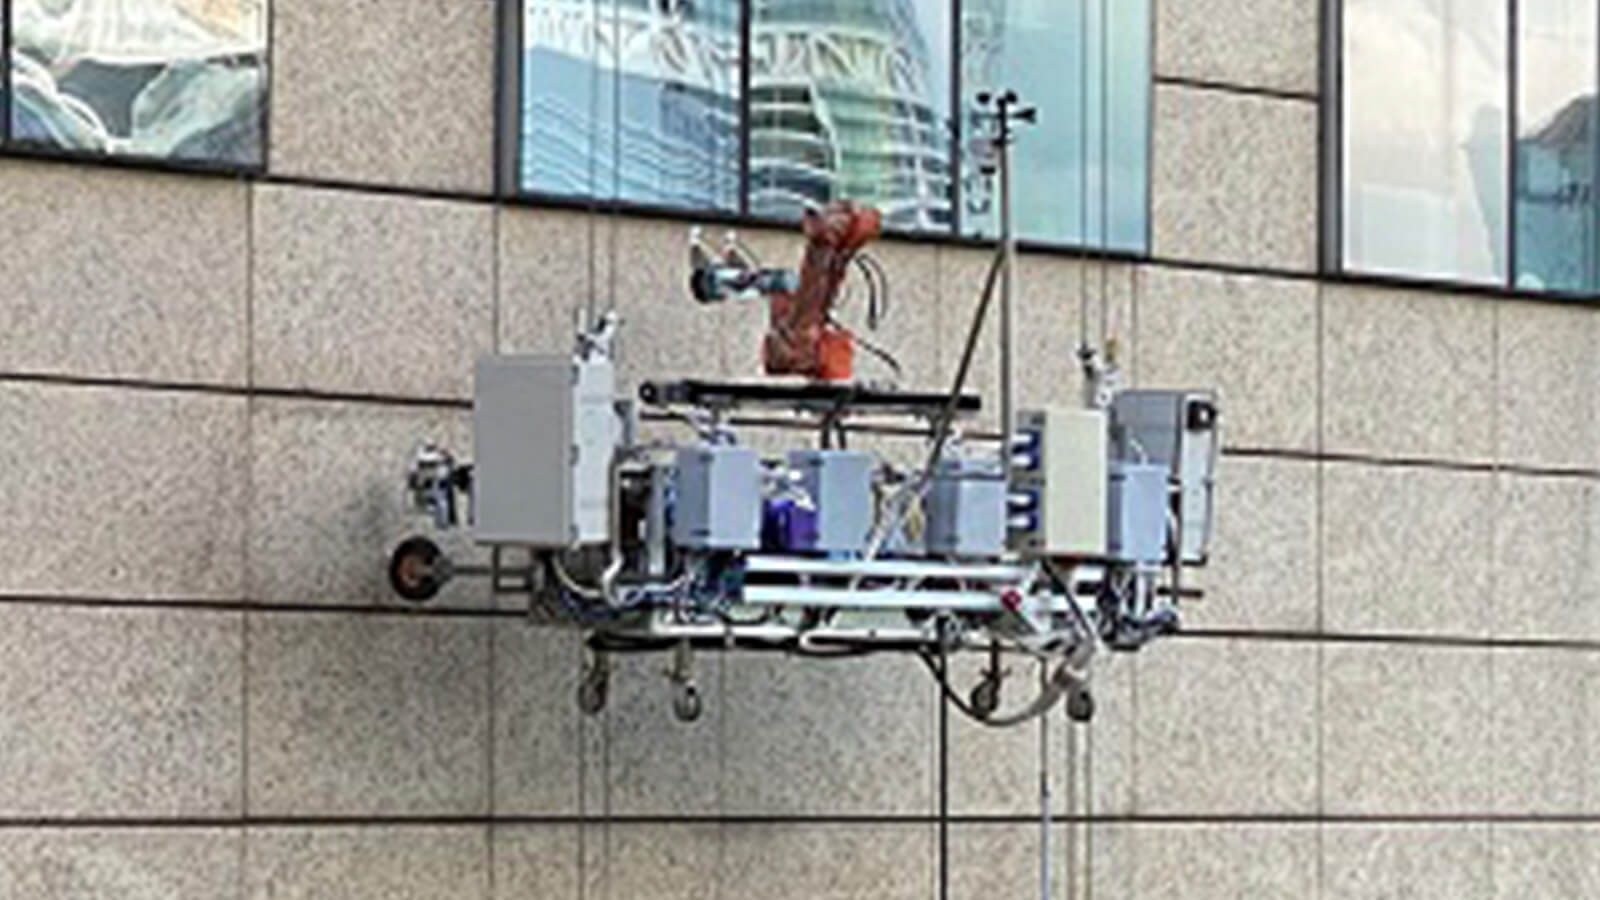 The AXIOBOTS in action at Centros @ Biopolis. Photo credit: Elid Technology International